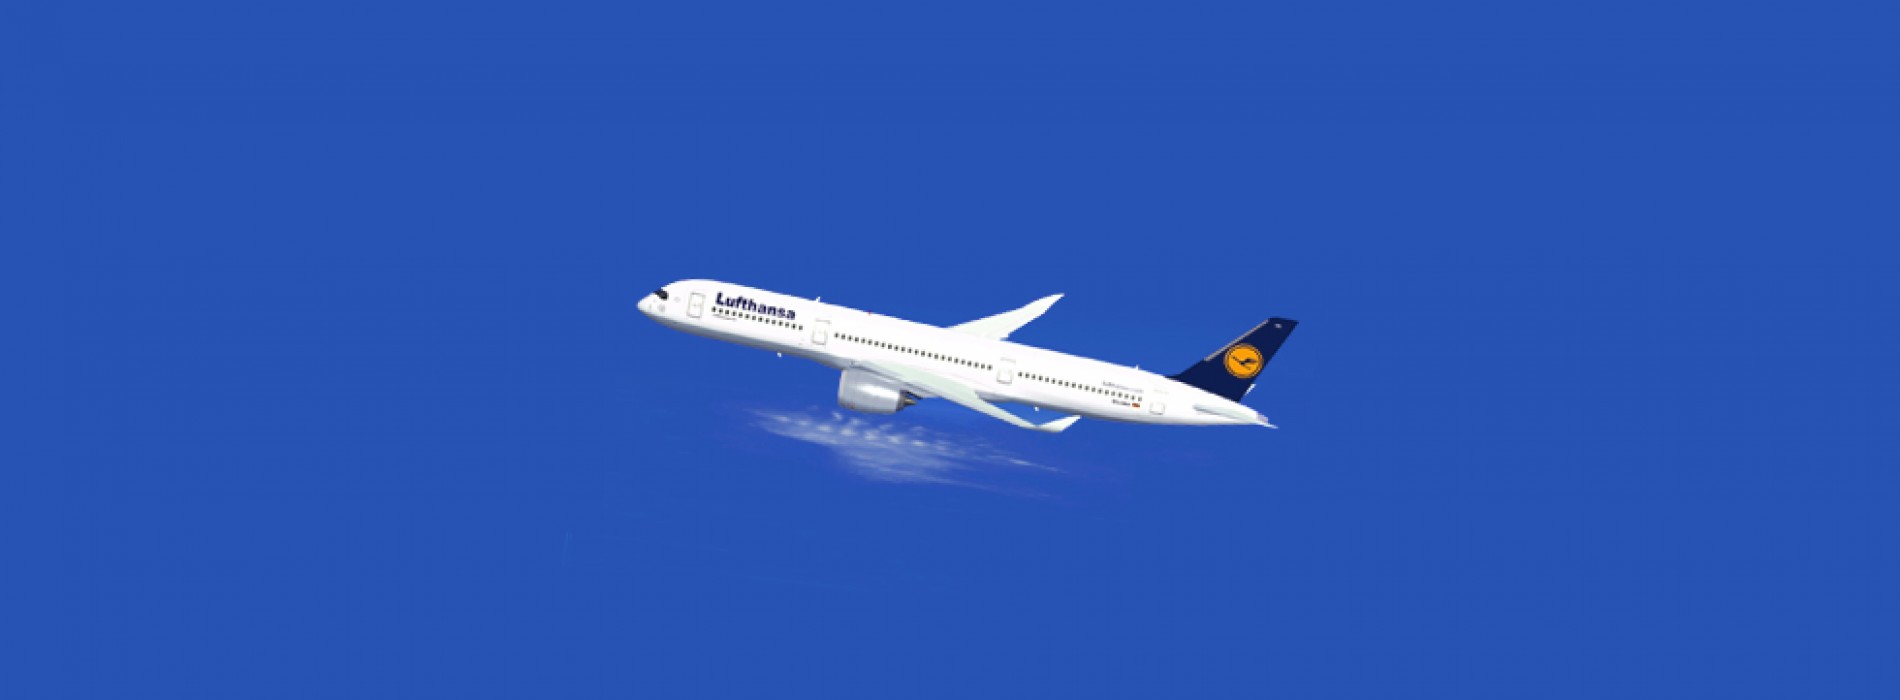 Delhi to welcome Lufthansa’s first A350